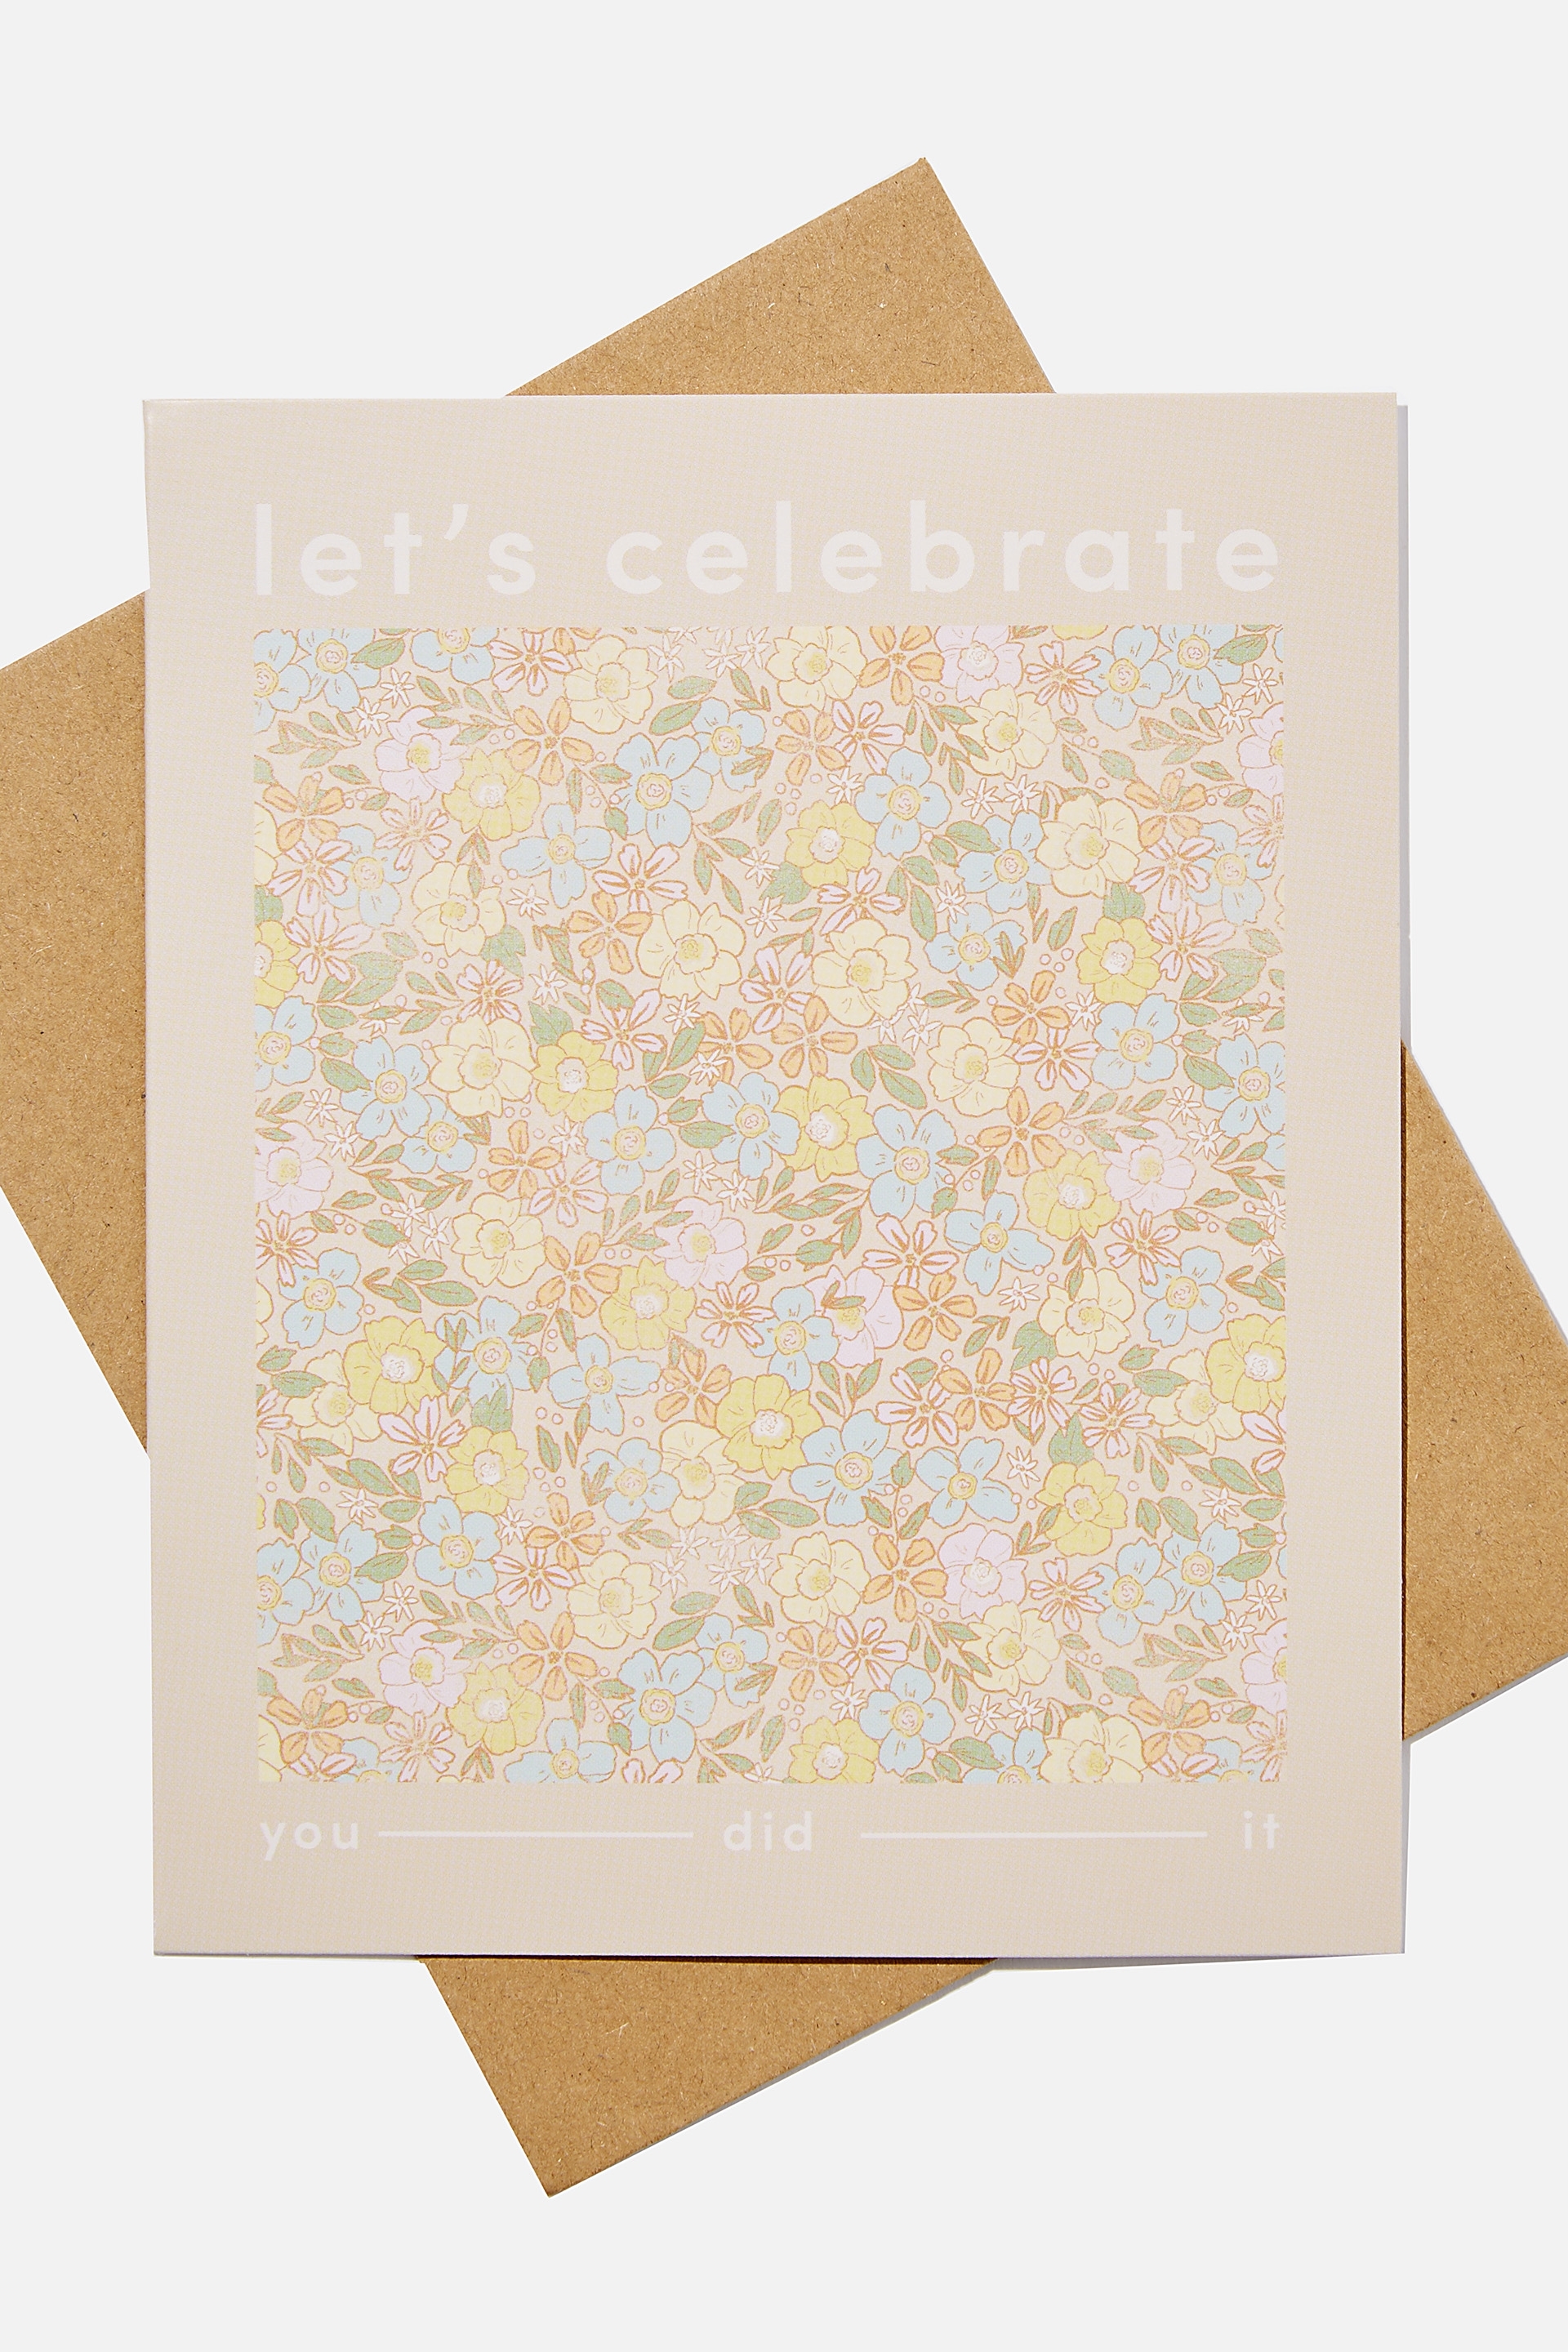 Typo - Congratulations Card - Celebrate you did it ditsy floral